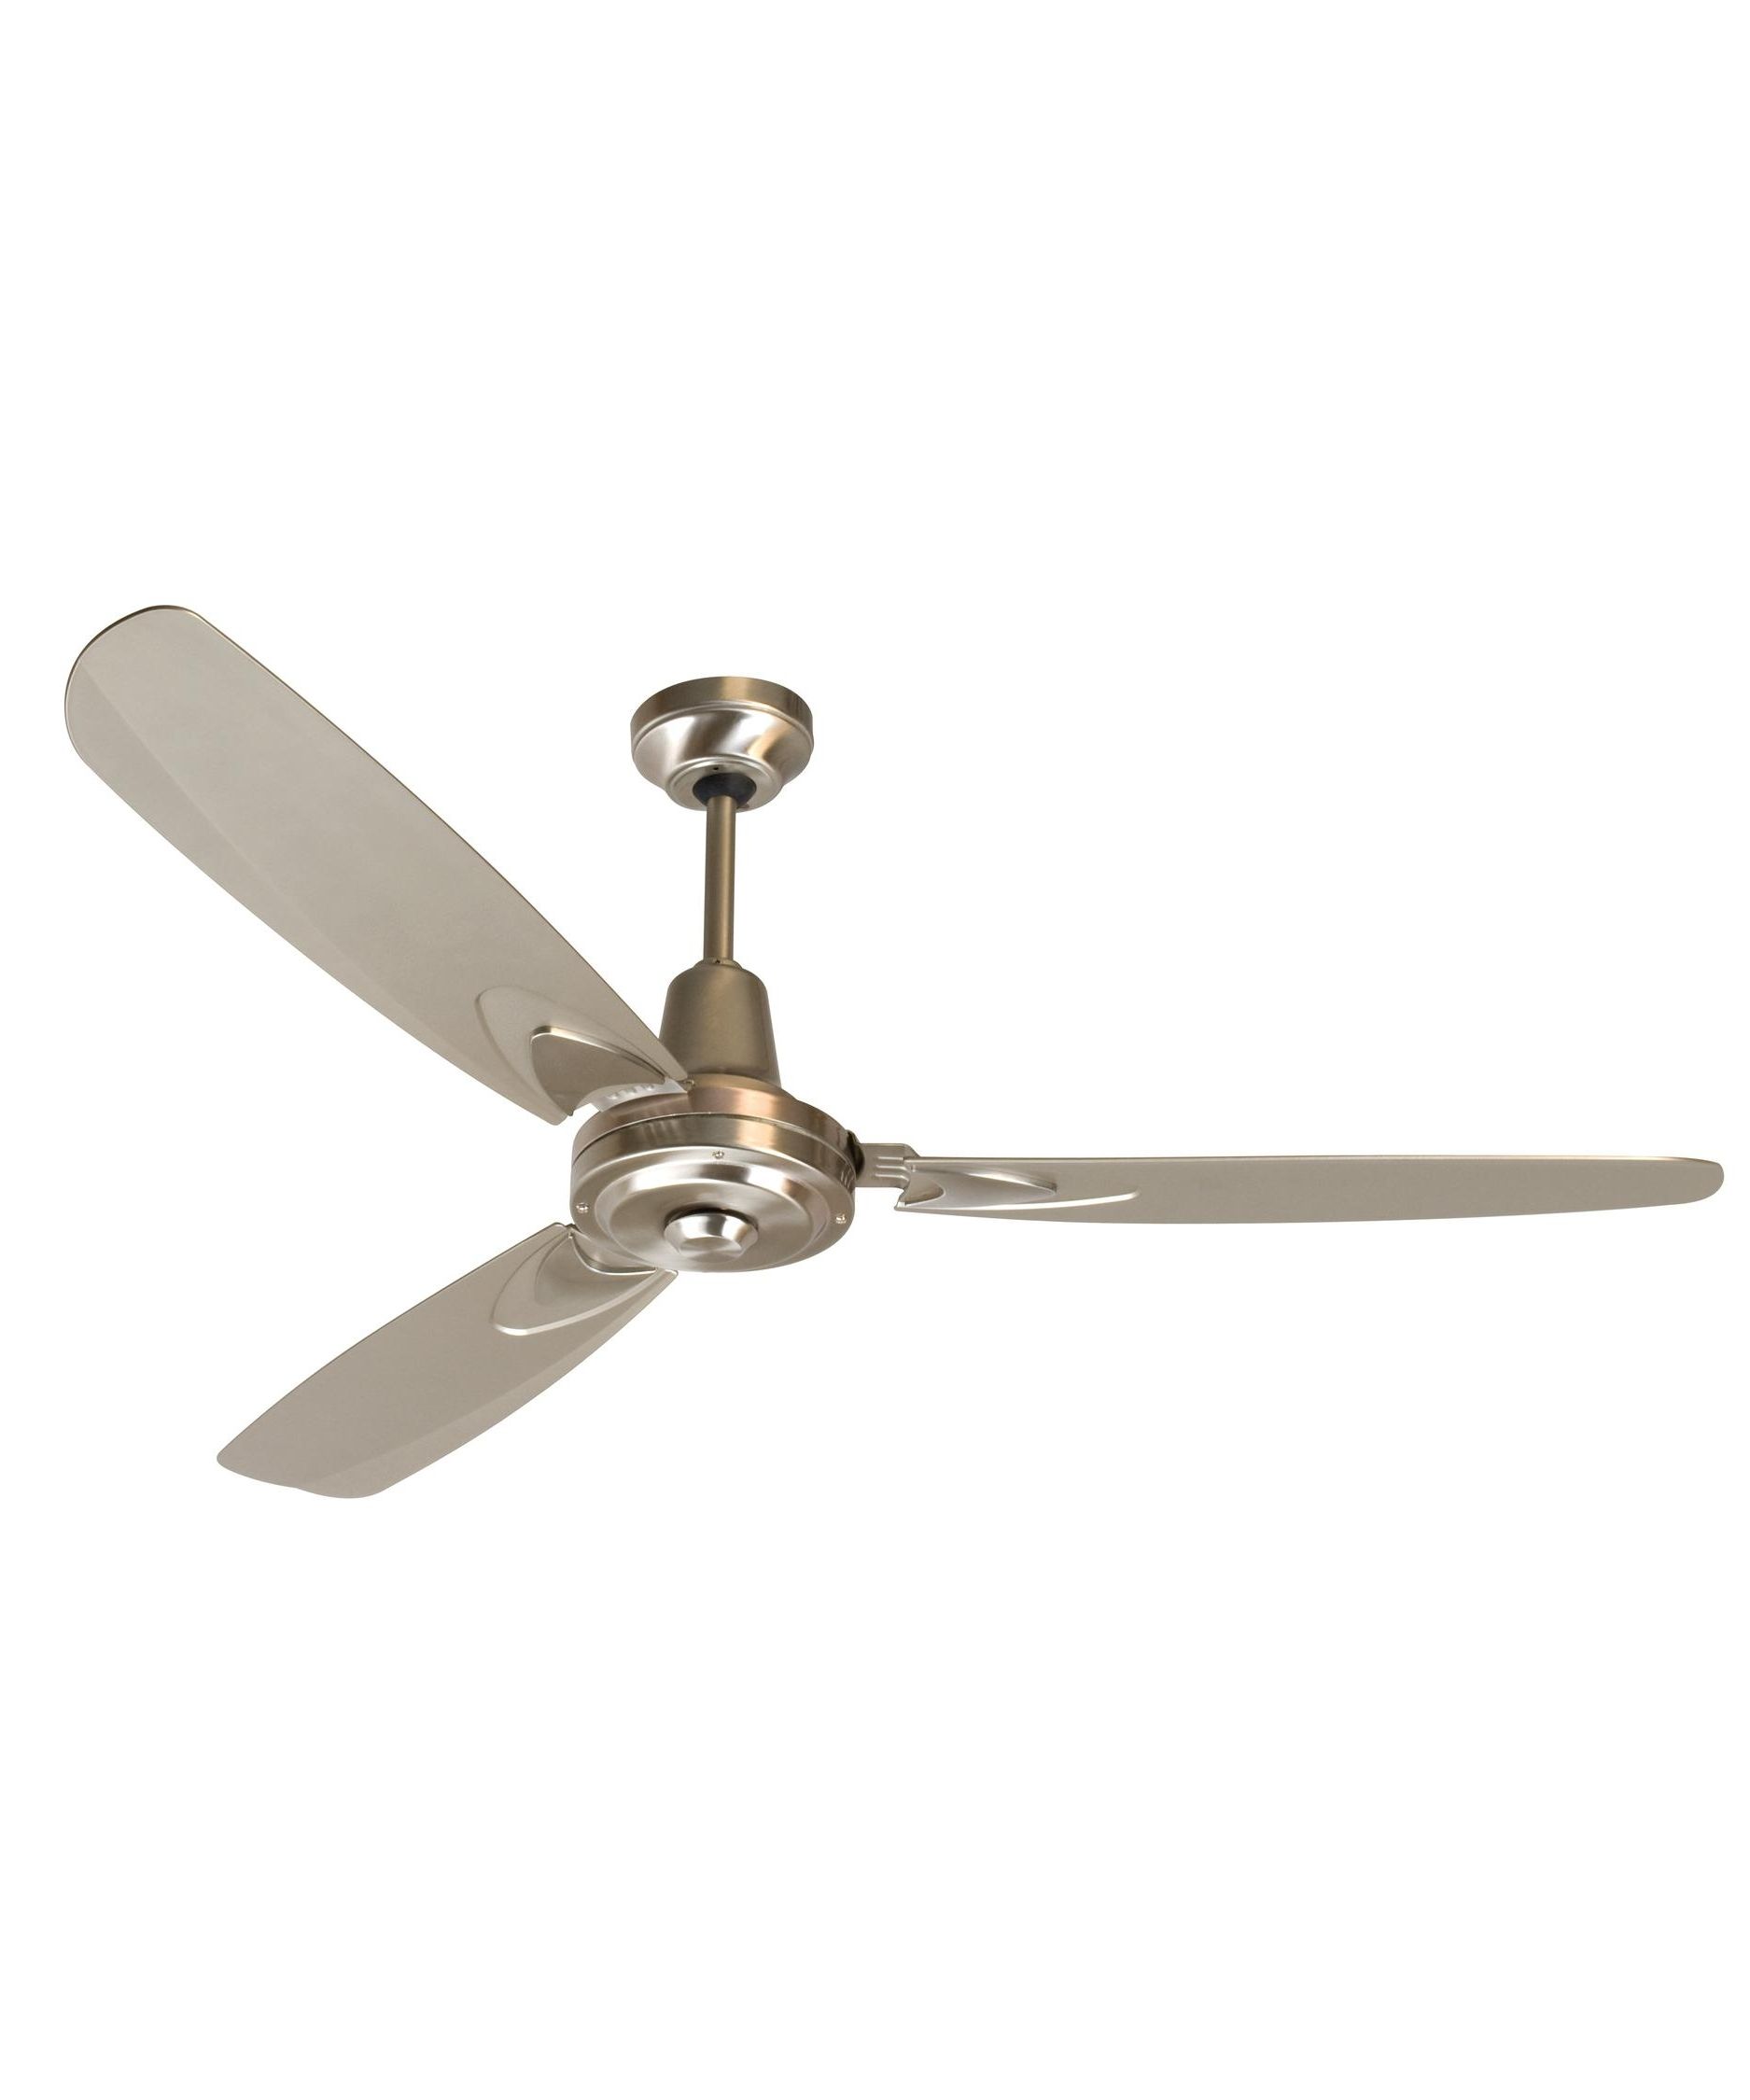 Stainless Steel Outdoor Ceiling Fans With Regard To Most Popular Craftmade Ve58 Velocity 58 Inch 3 Blade Ceiling Fan (View 18 of 20)